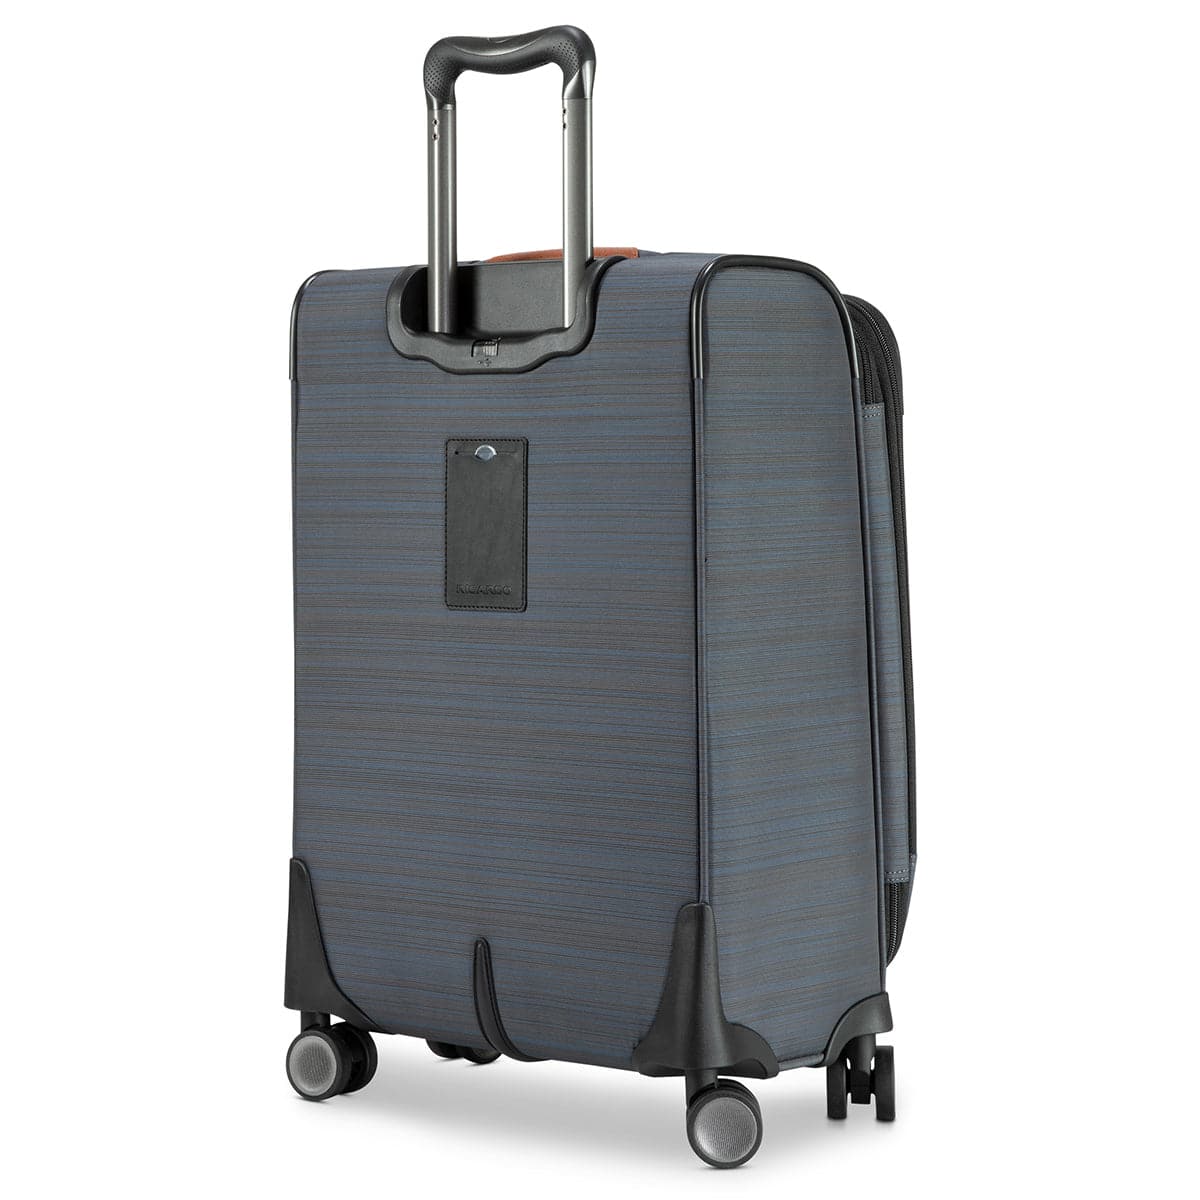 Ricardo Beverly Hills Montecito 2.0 Soft Side Carry-On Luggage